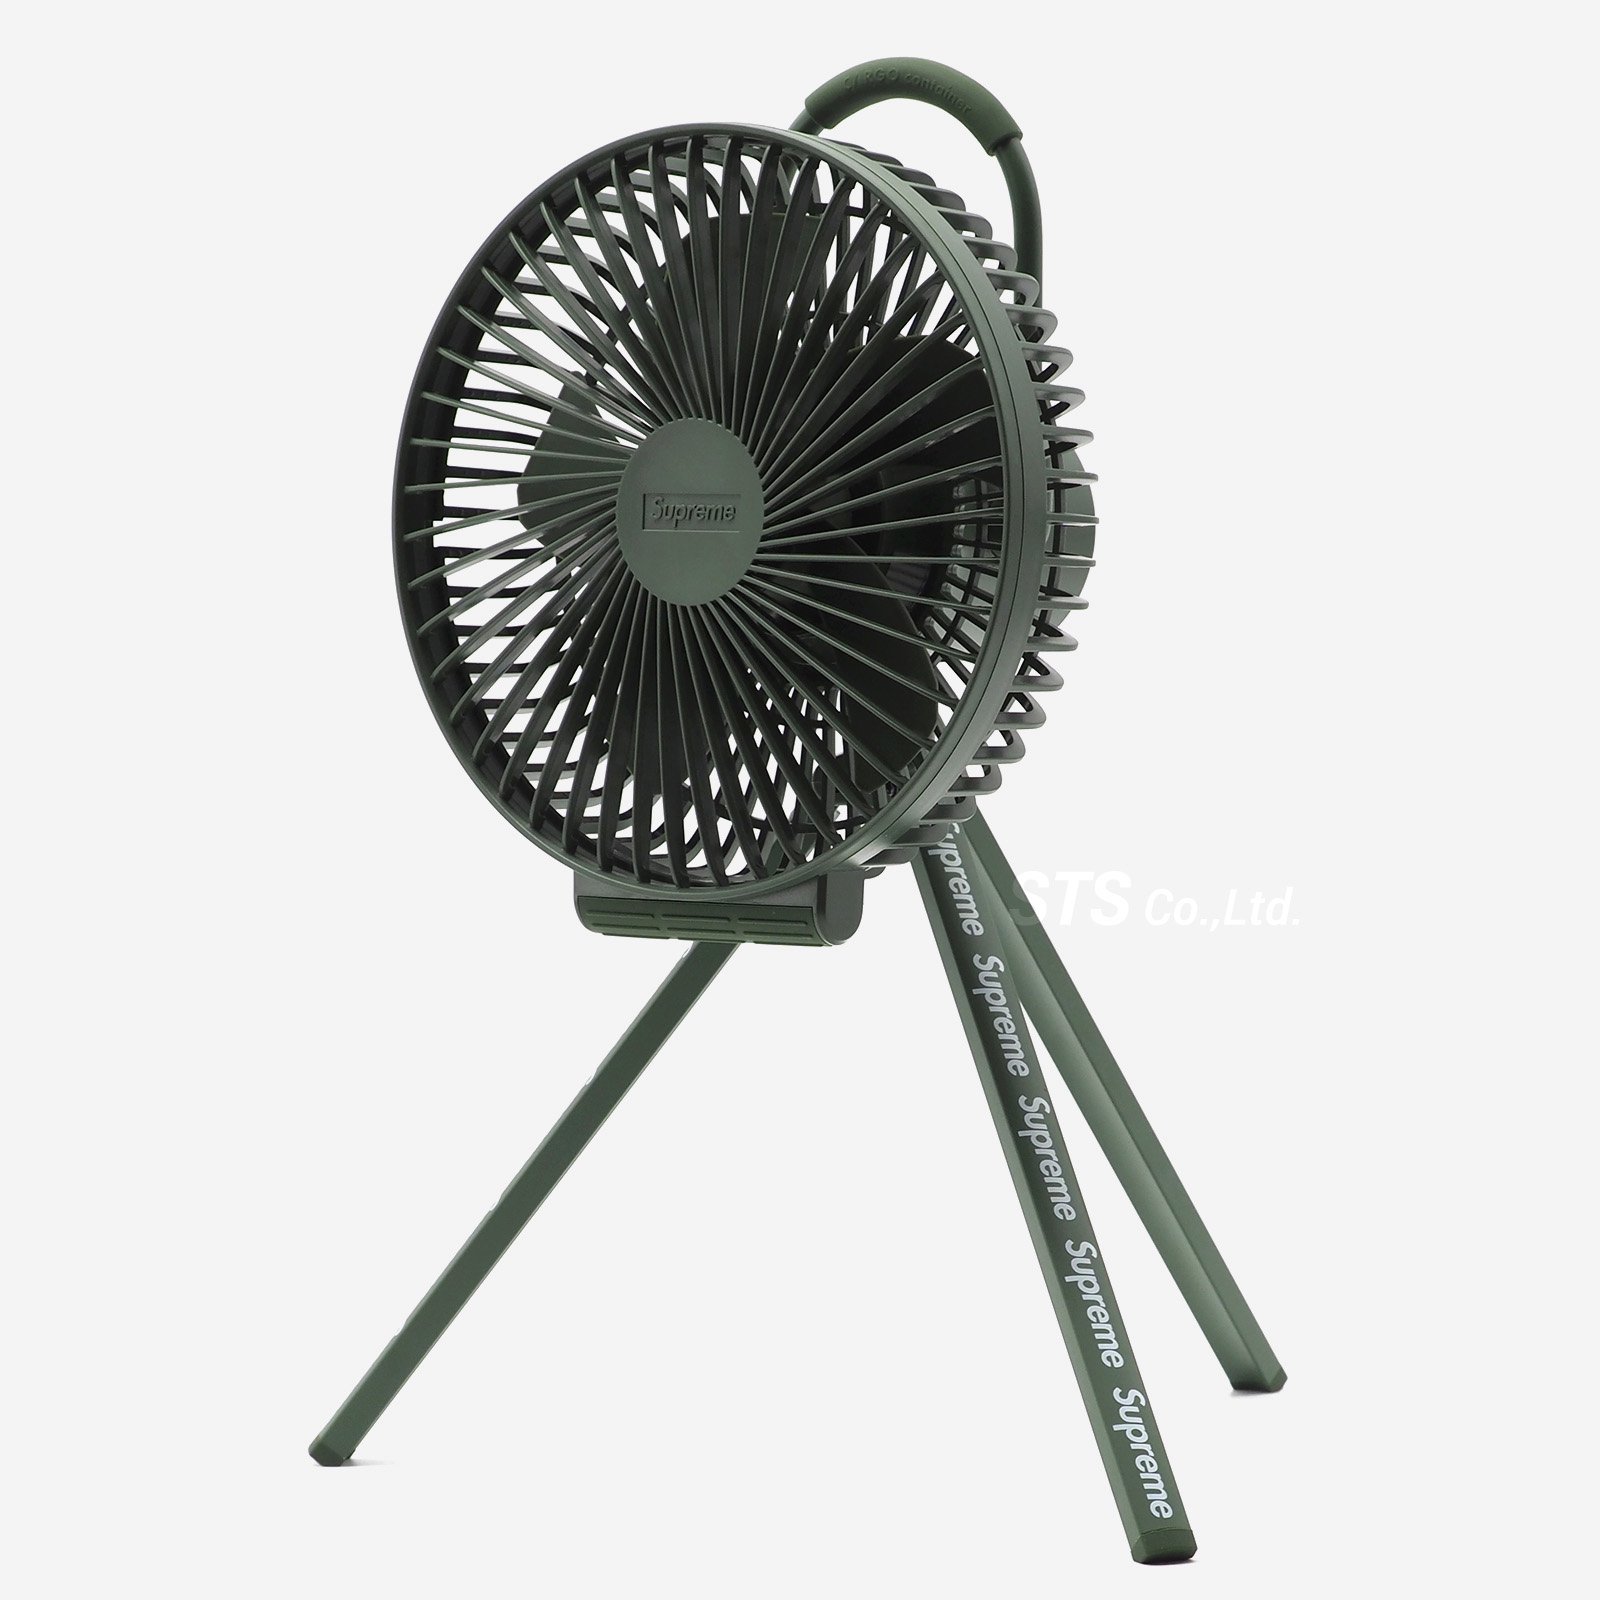 Supreme Cargo Container Electric Fan